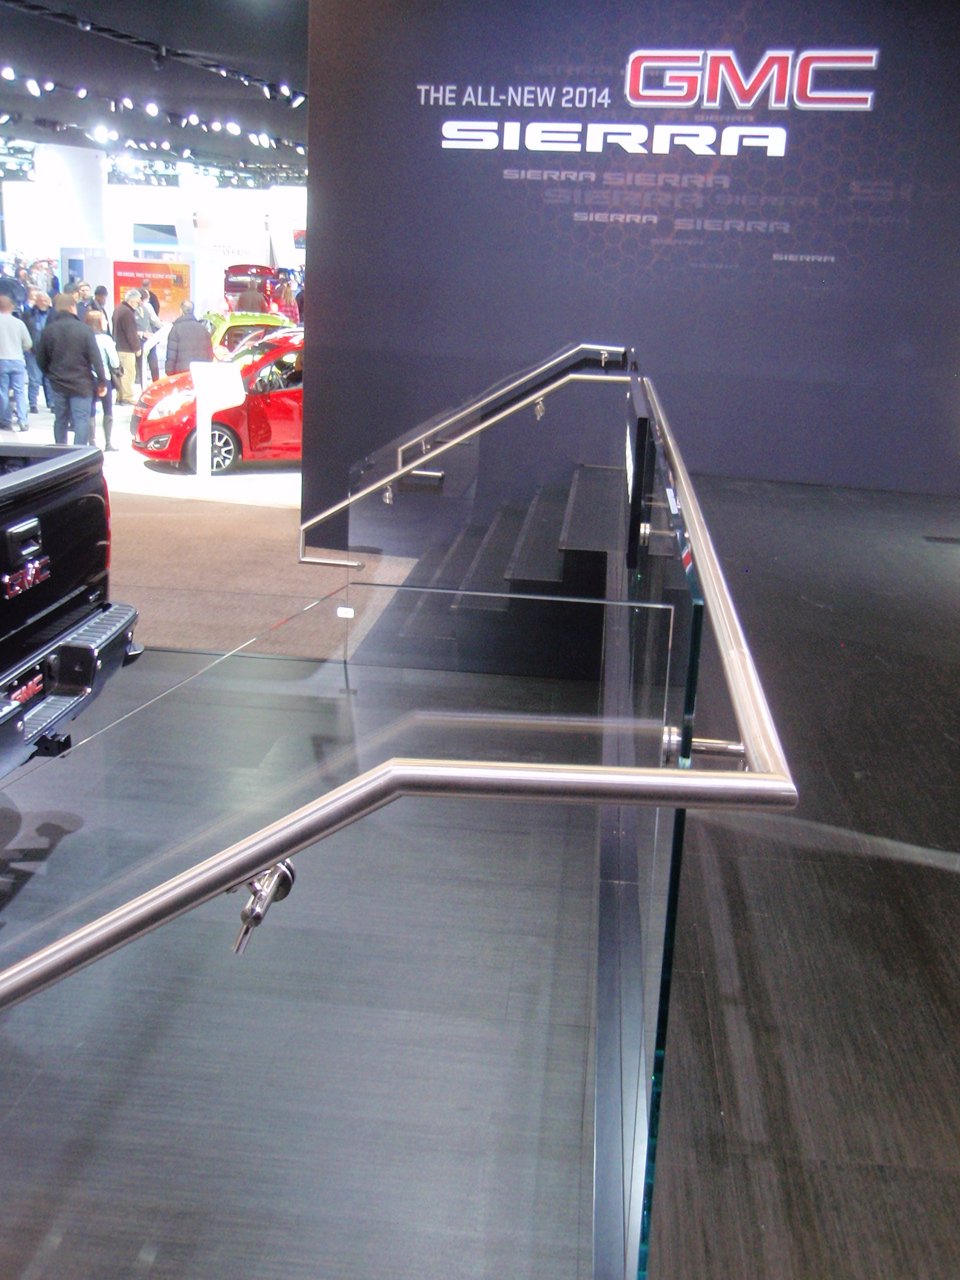 2014 General Motors Corp. International Auto Show Display, Glass & Stainless Steel Guard Railings.